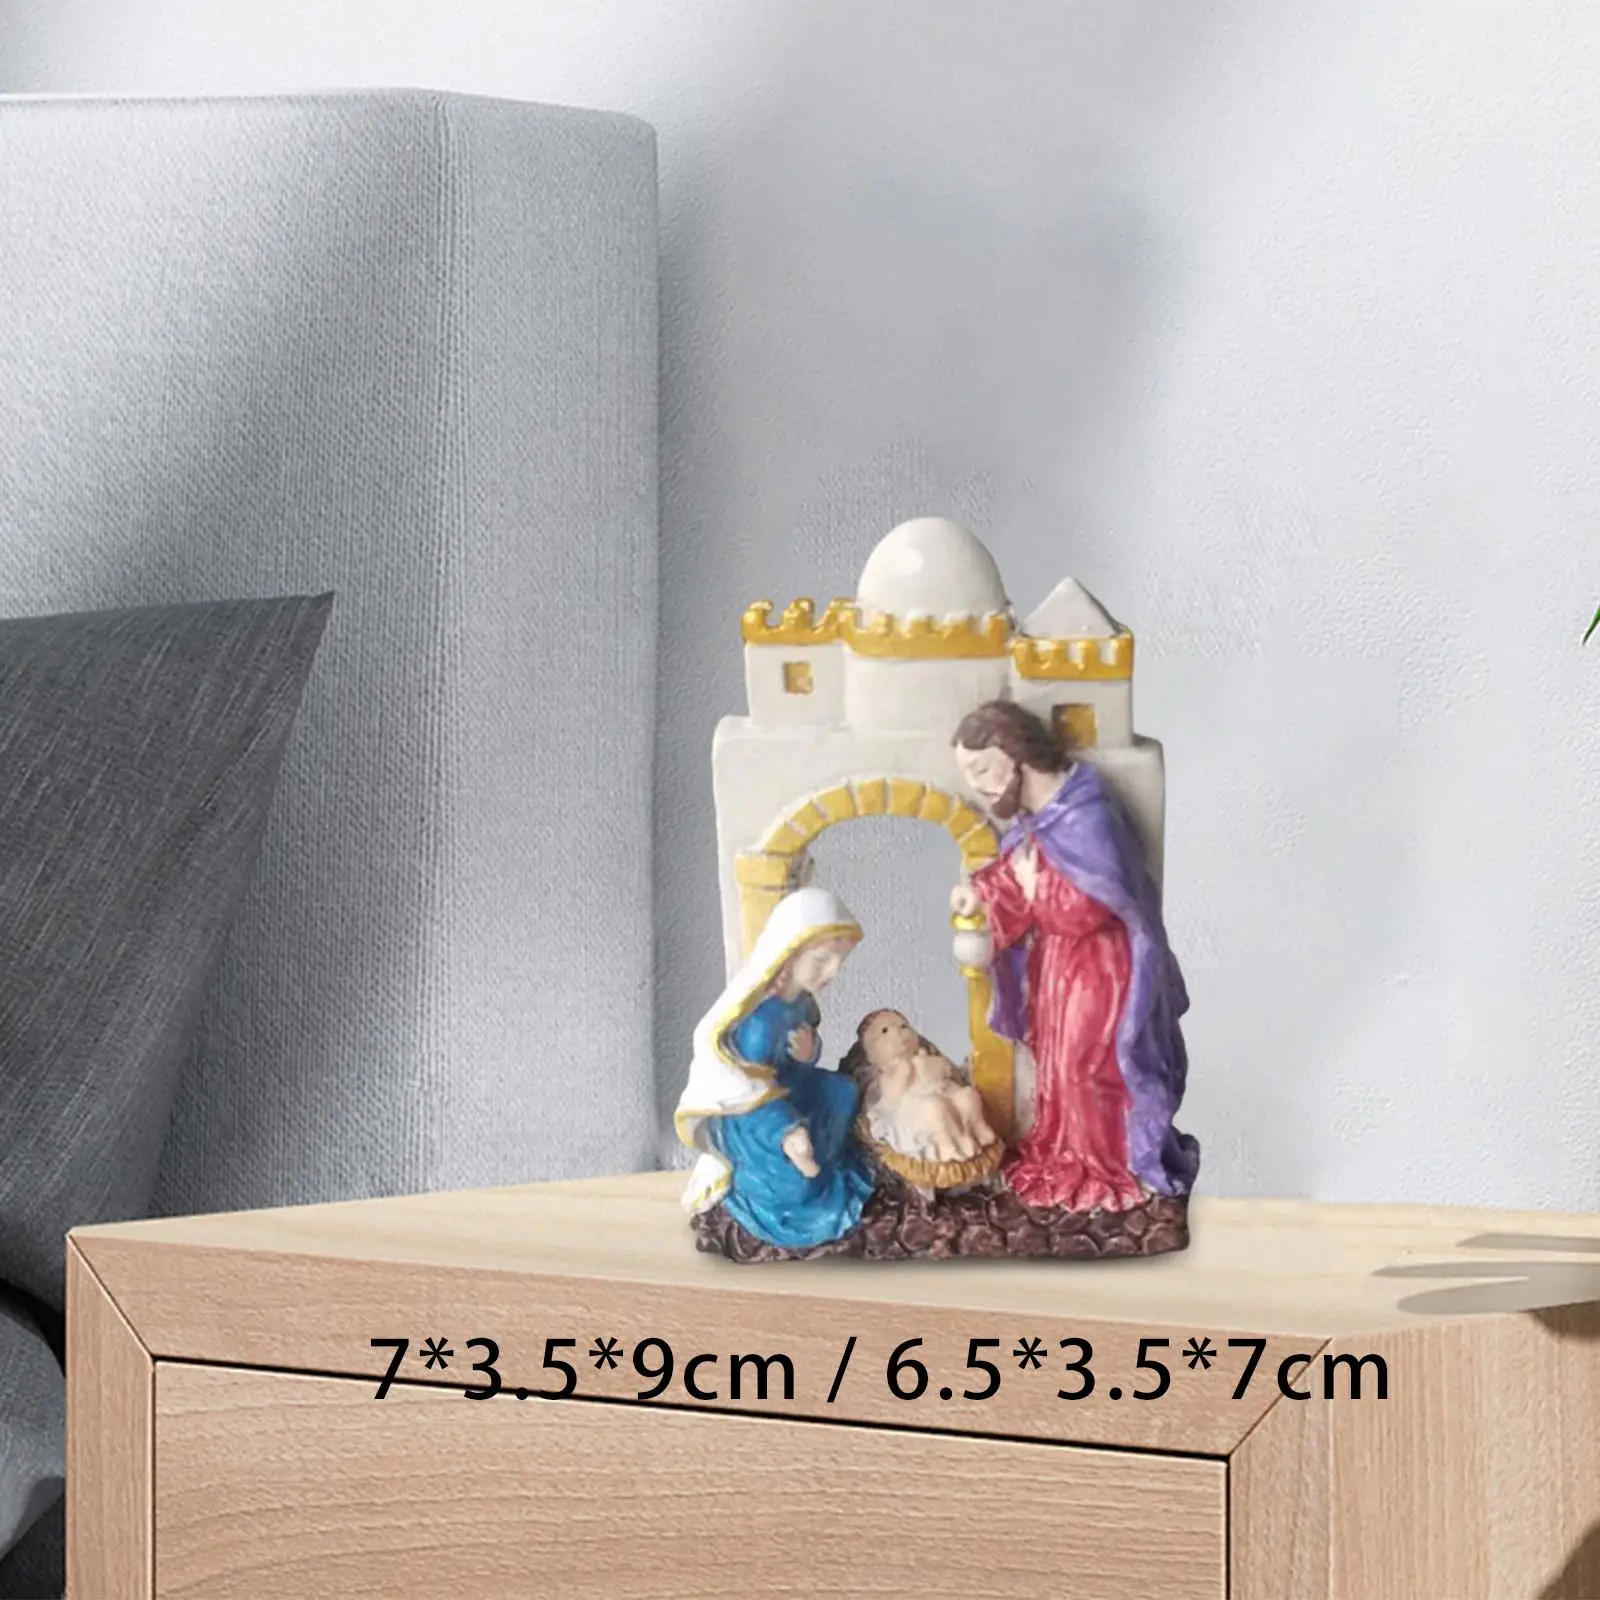 

Holy Family Figurine Home Indoor Decoration Joseph Jesus Mary Mother Religious Statues Religious for Memorial Decor Gifts